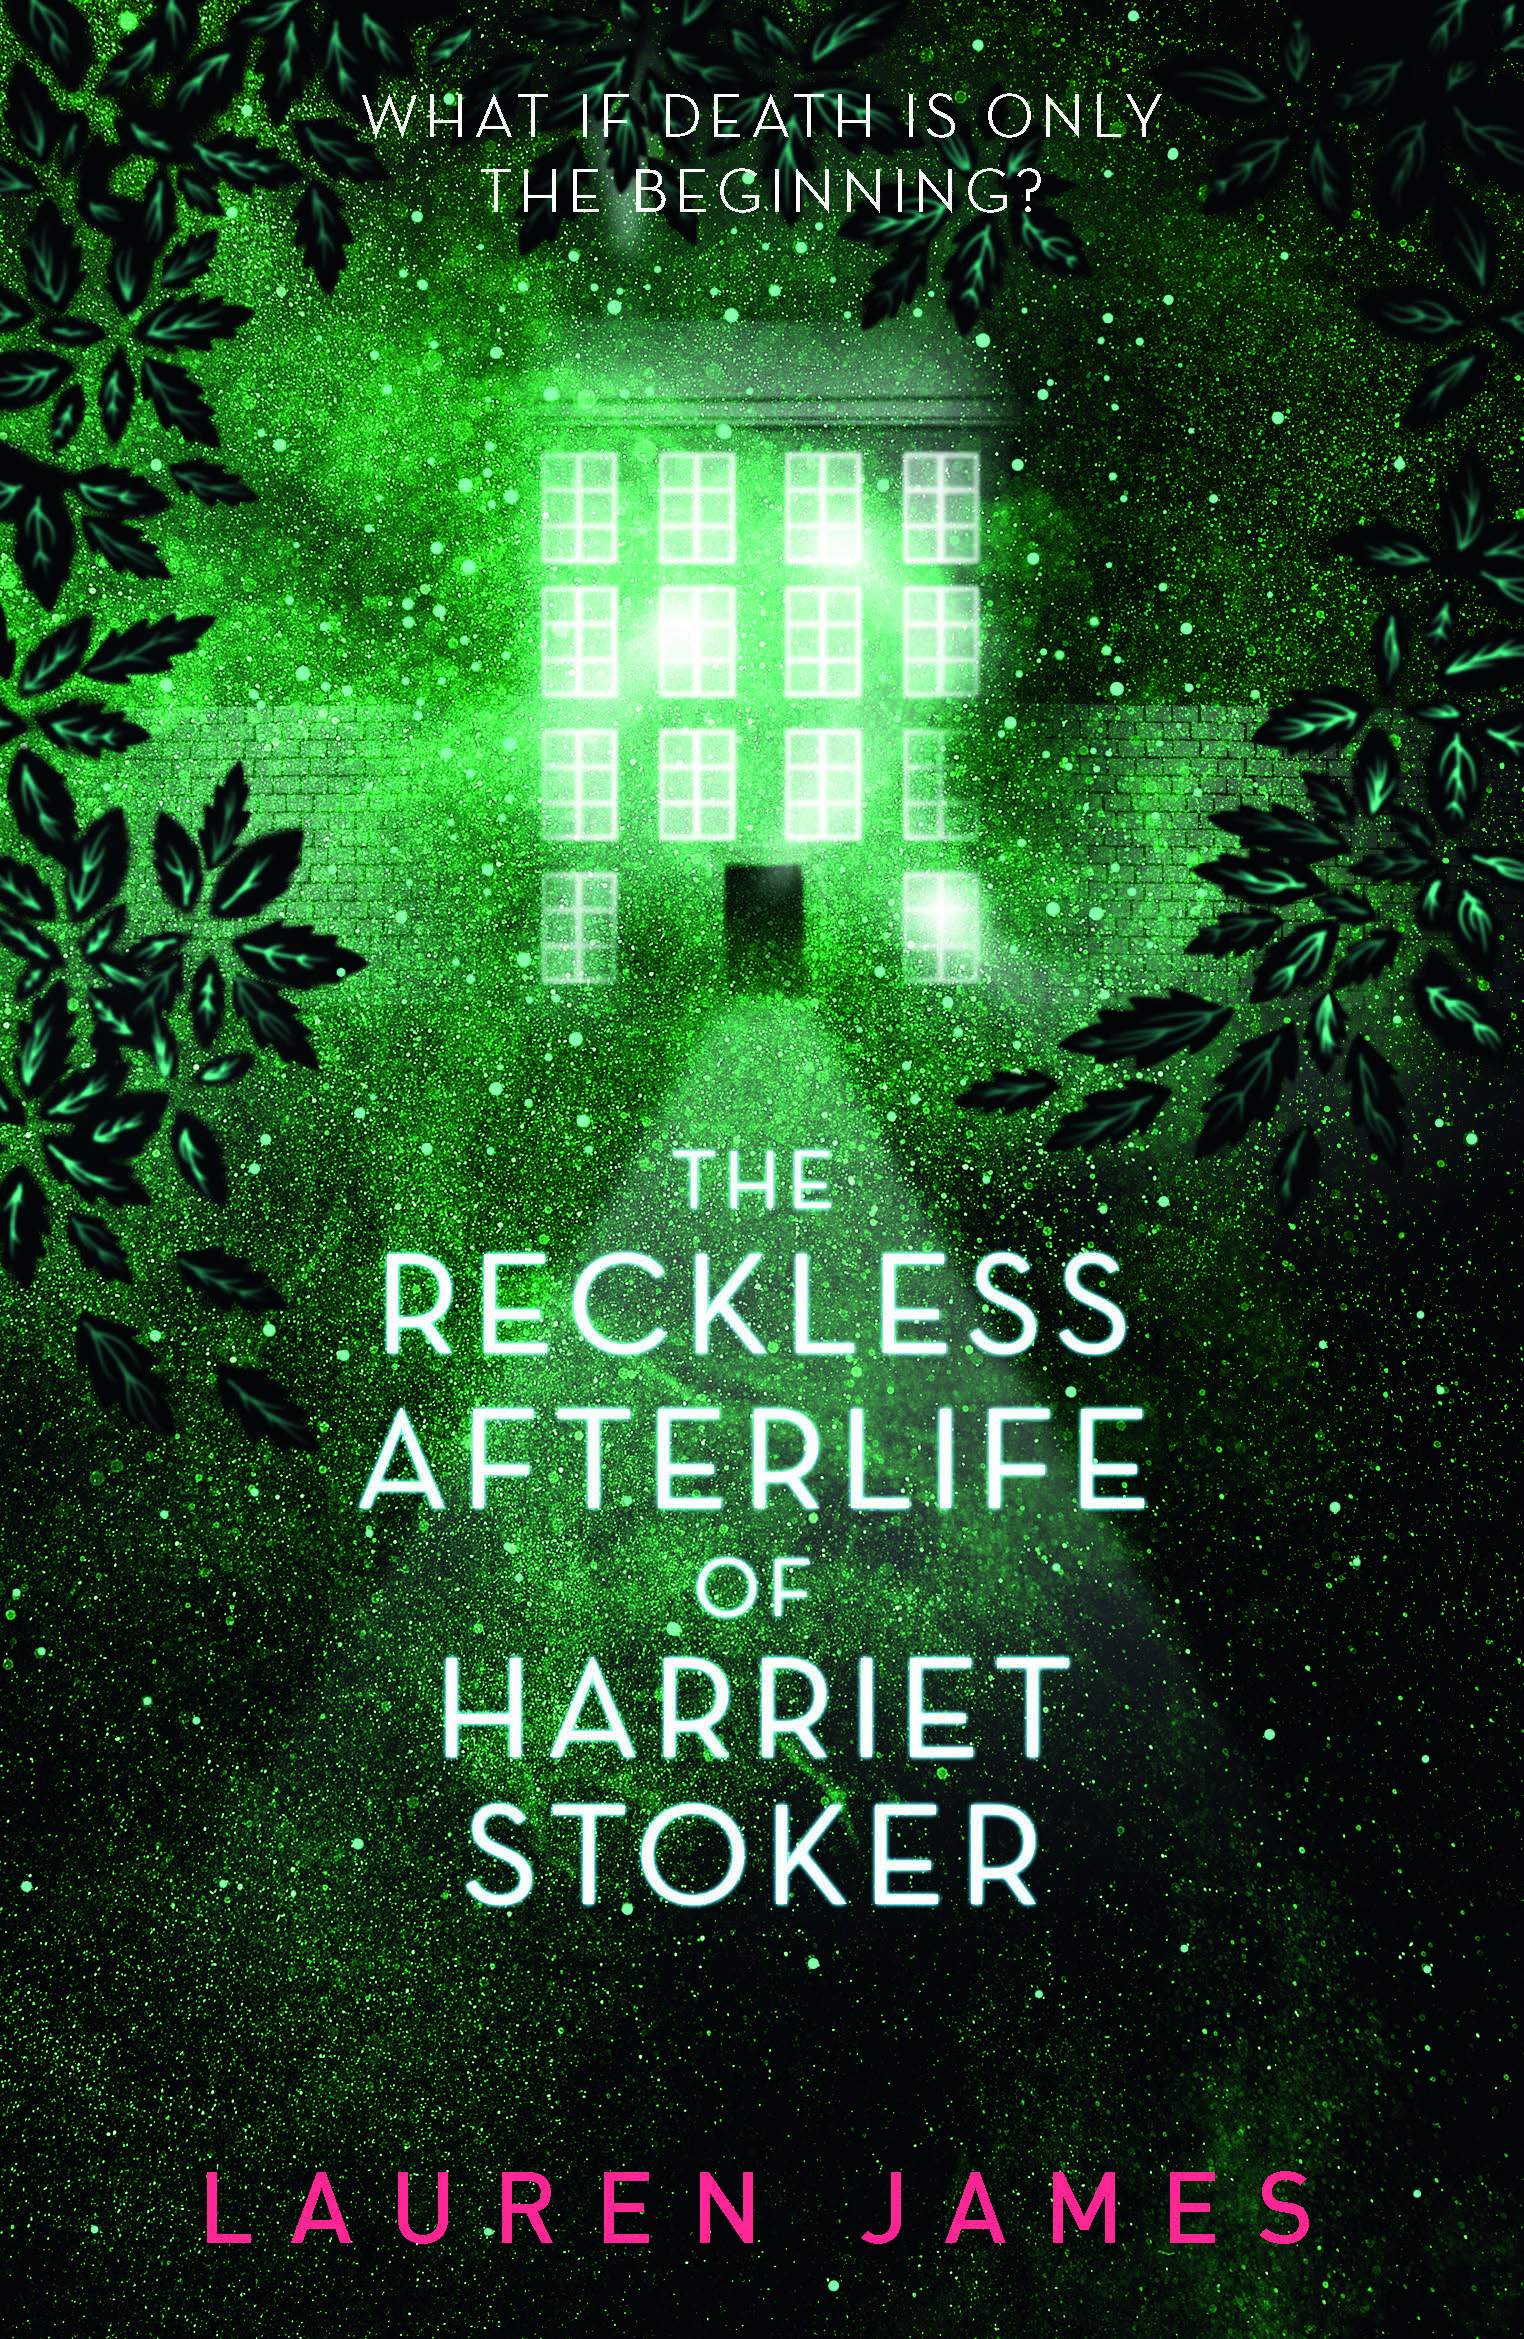 The-Reckless-Afterlife-of-Harriet-Stoker